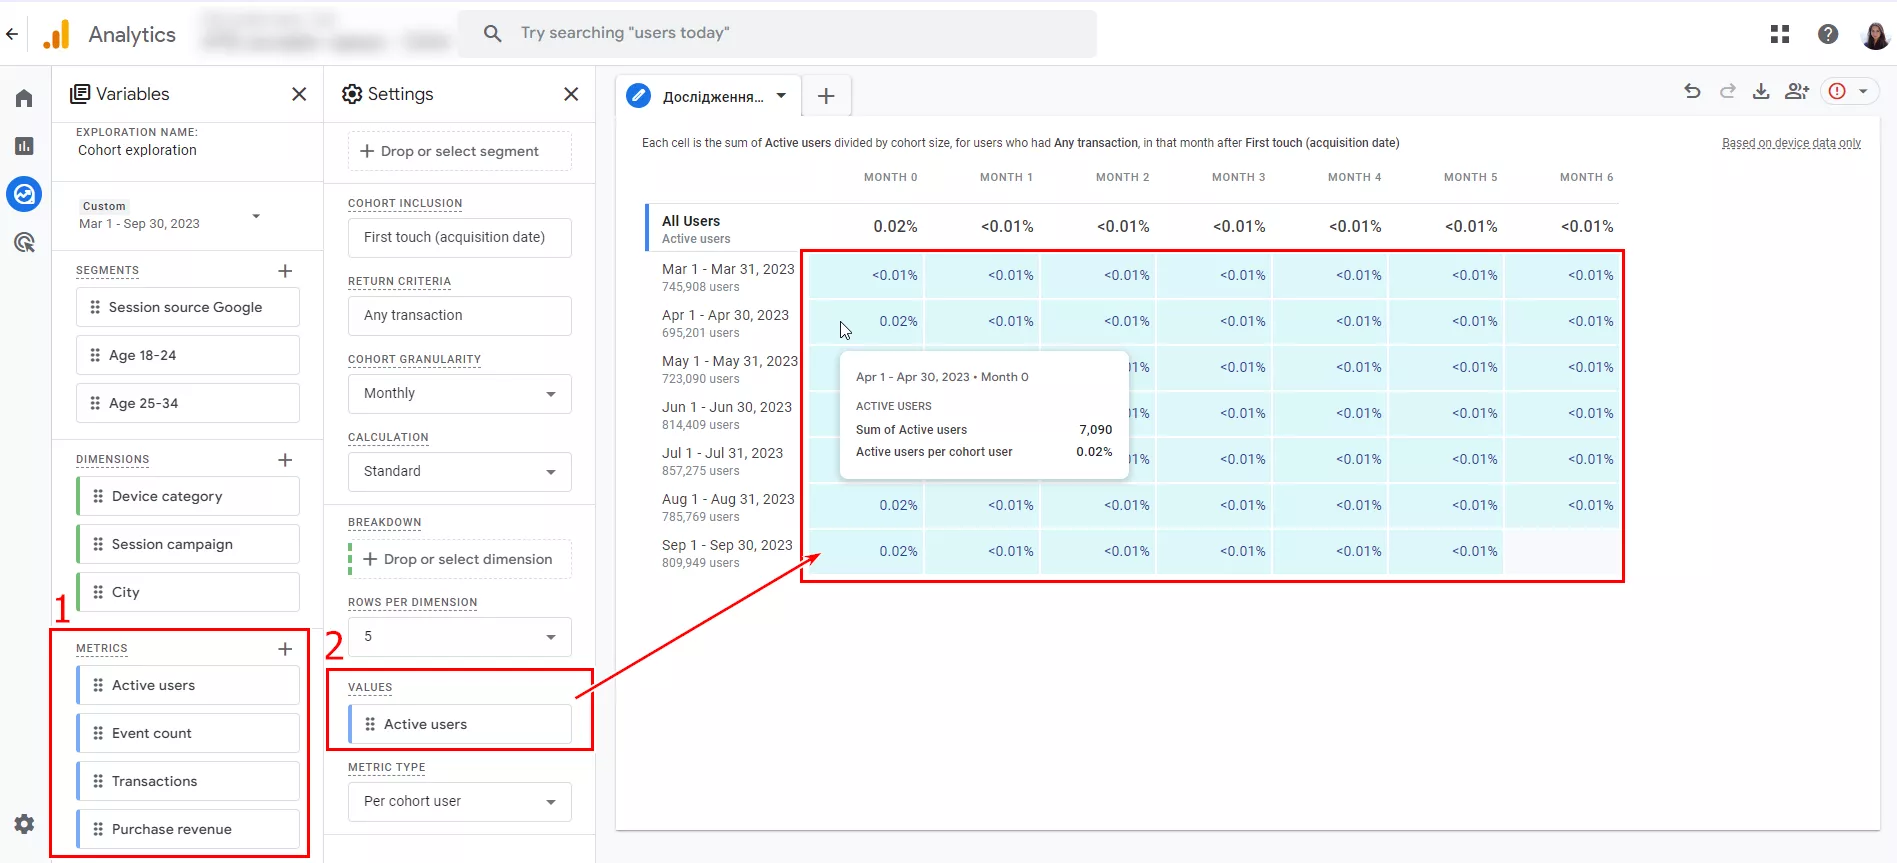 Select Purchase revenue to display the revenue from purchases made by the cohort during the specified period.